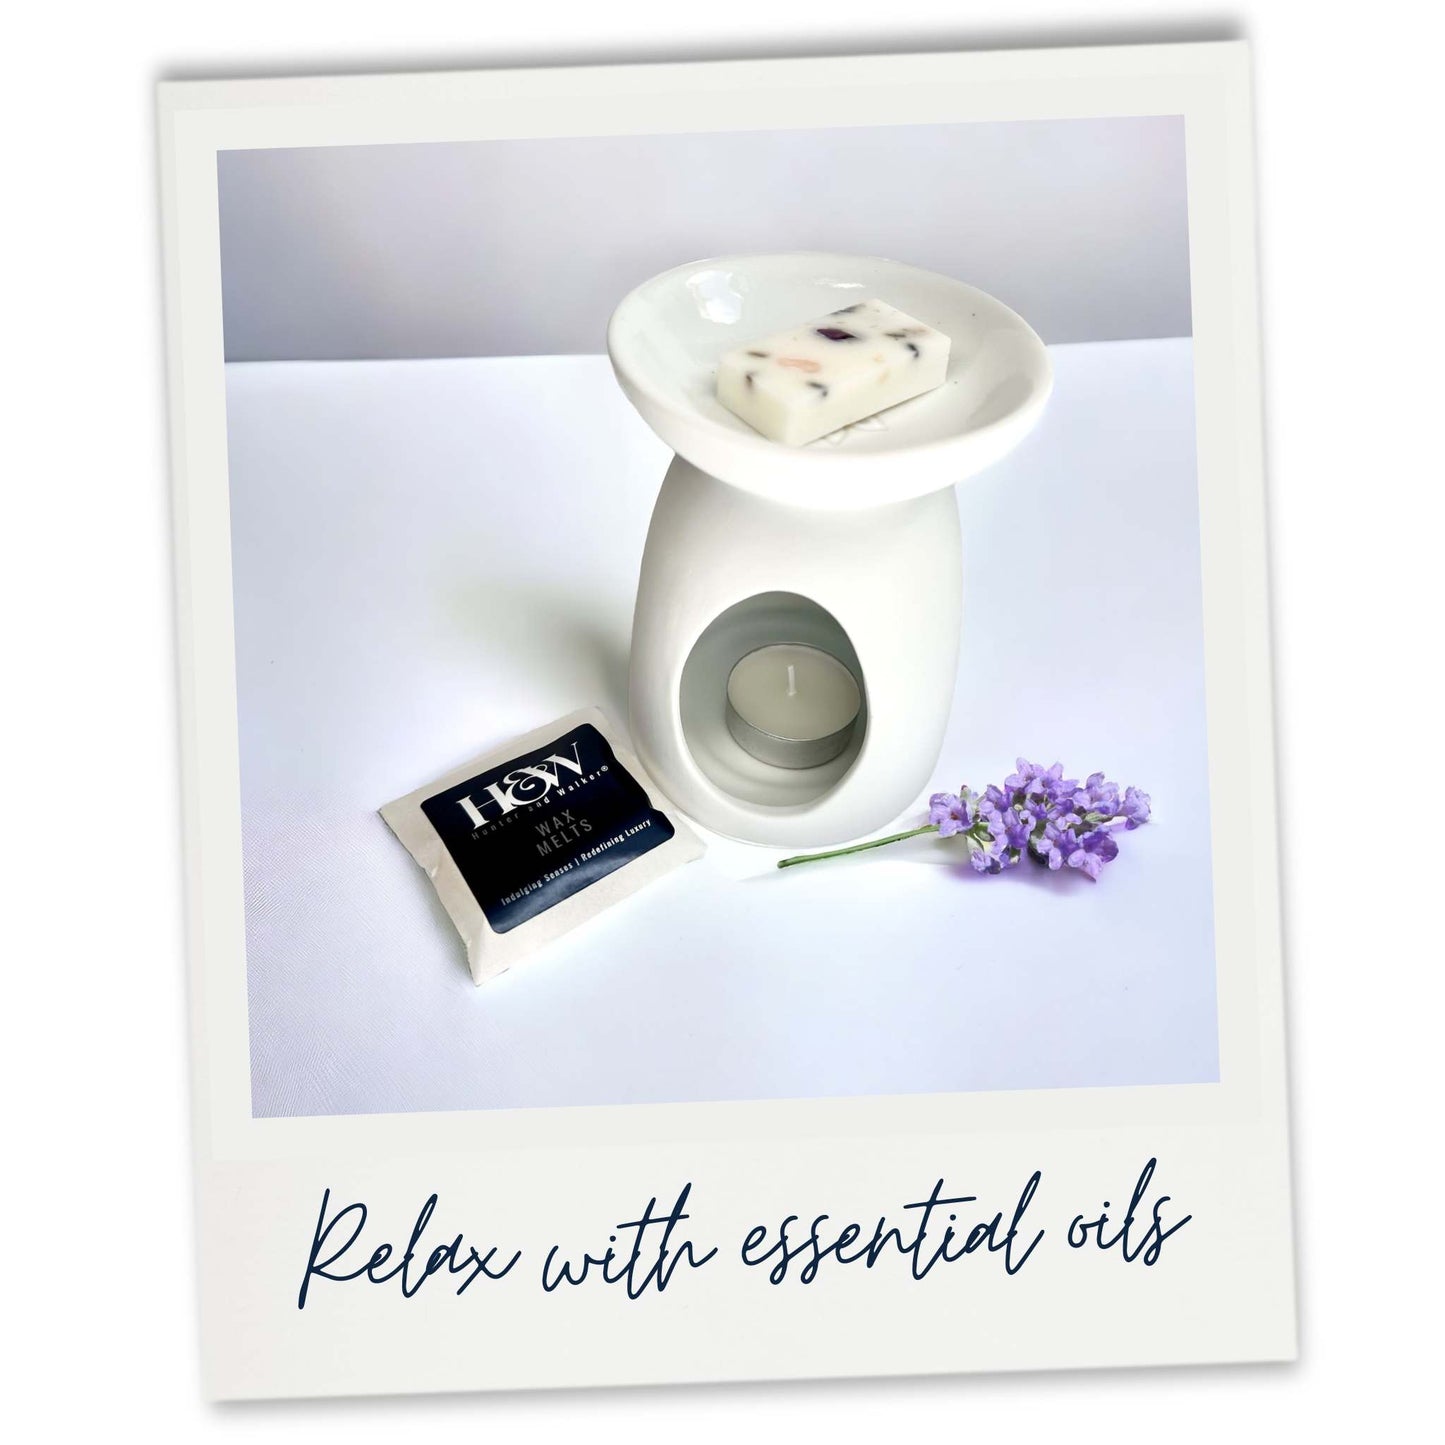 Anxiety Cleanse essential oil wax melt sample in a white wax warmer next to lavender